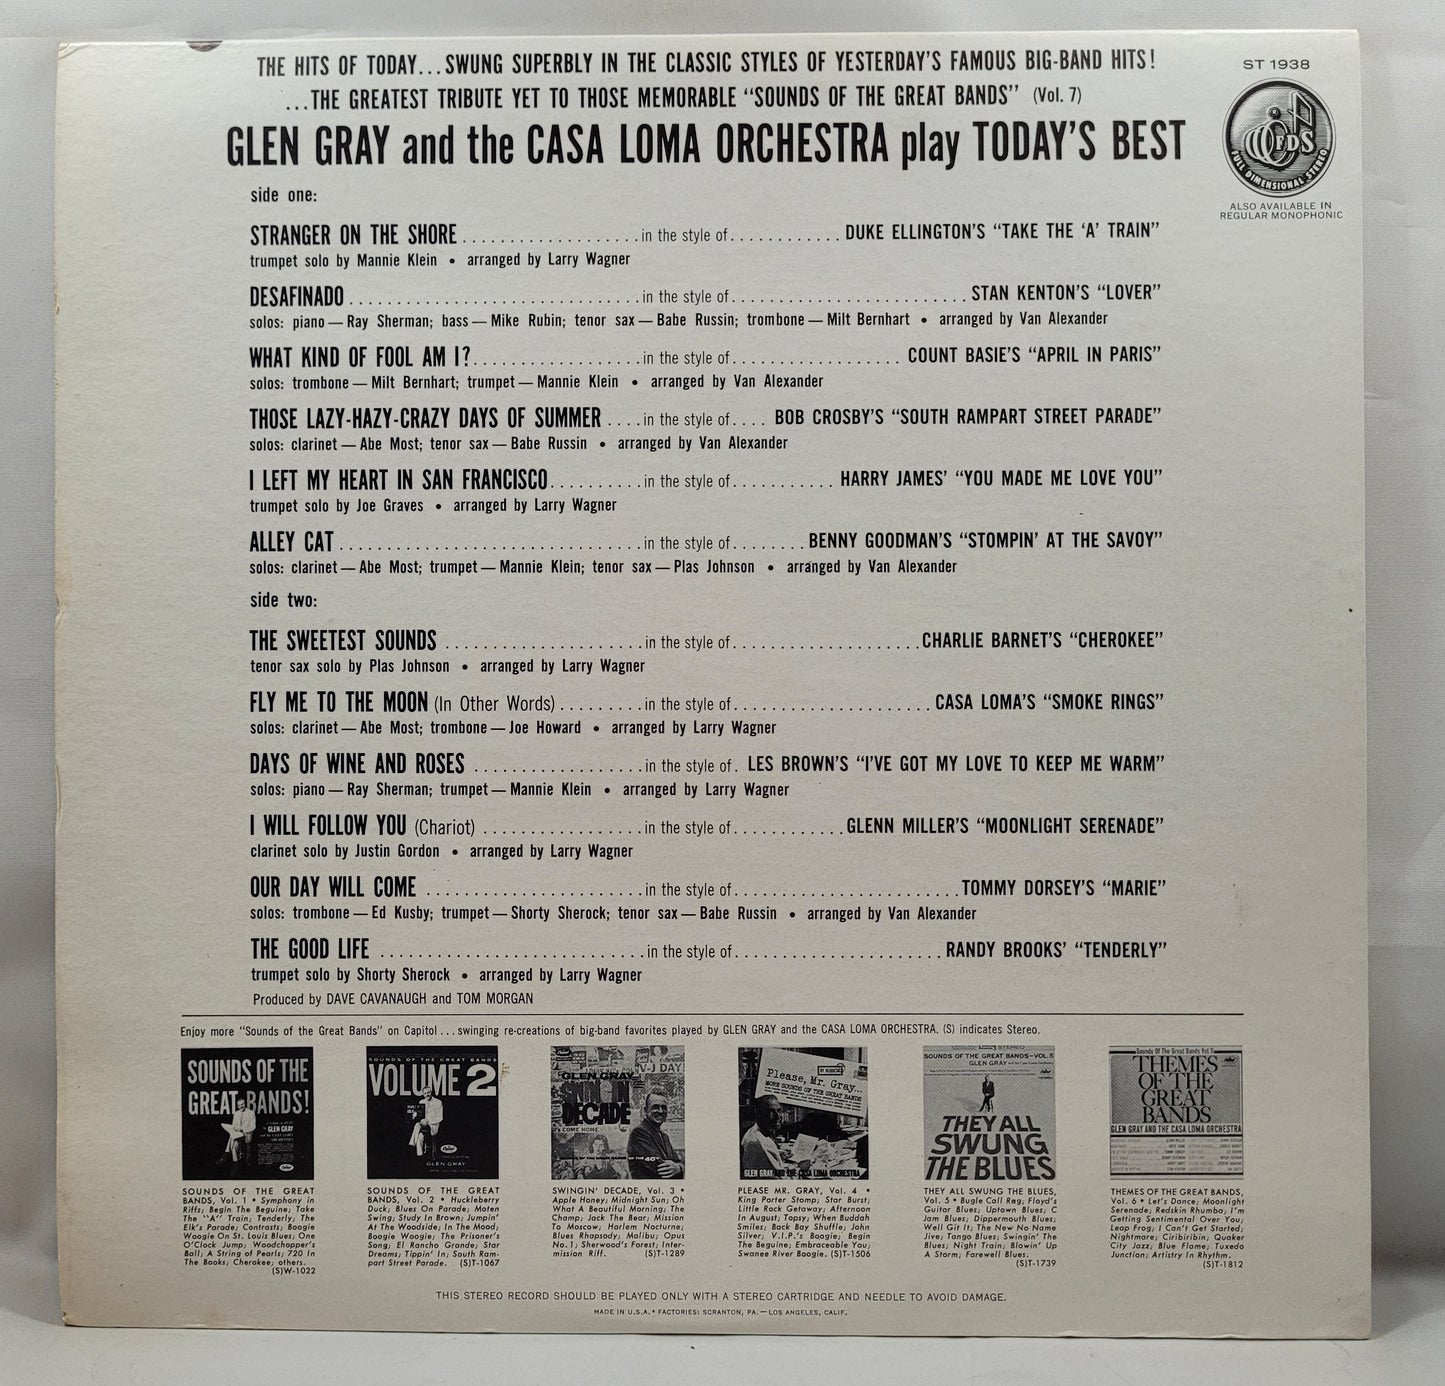 Glen Gray and The Casa Loma Orchestra - Today's Best [Vinyl Record LP]